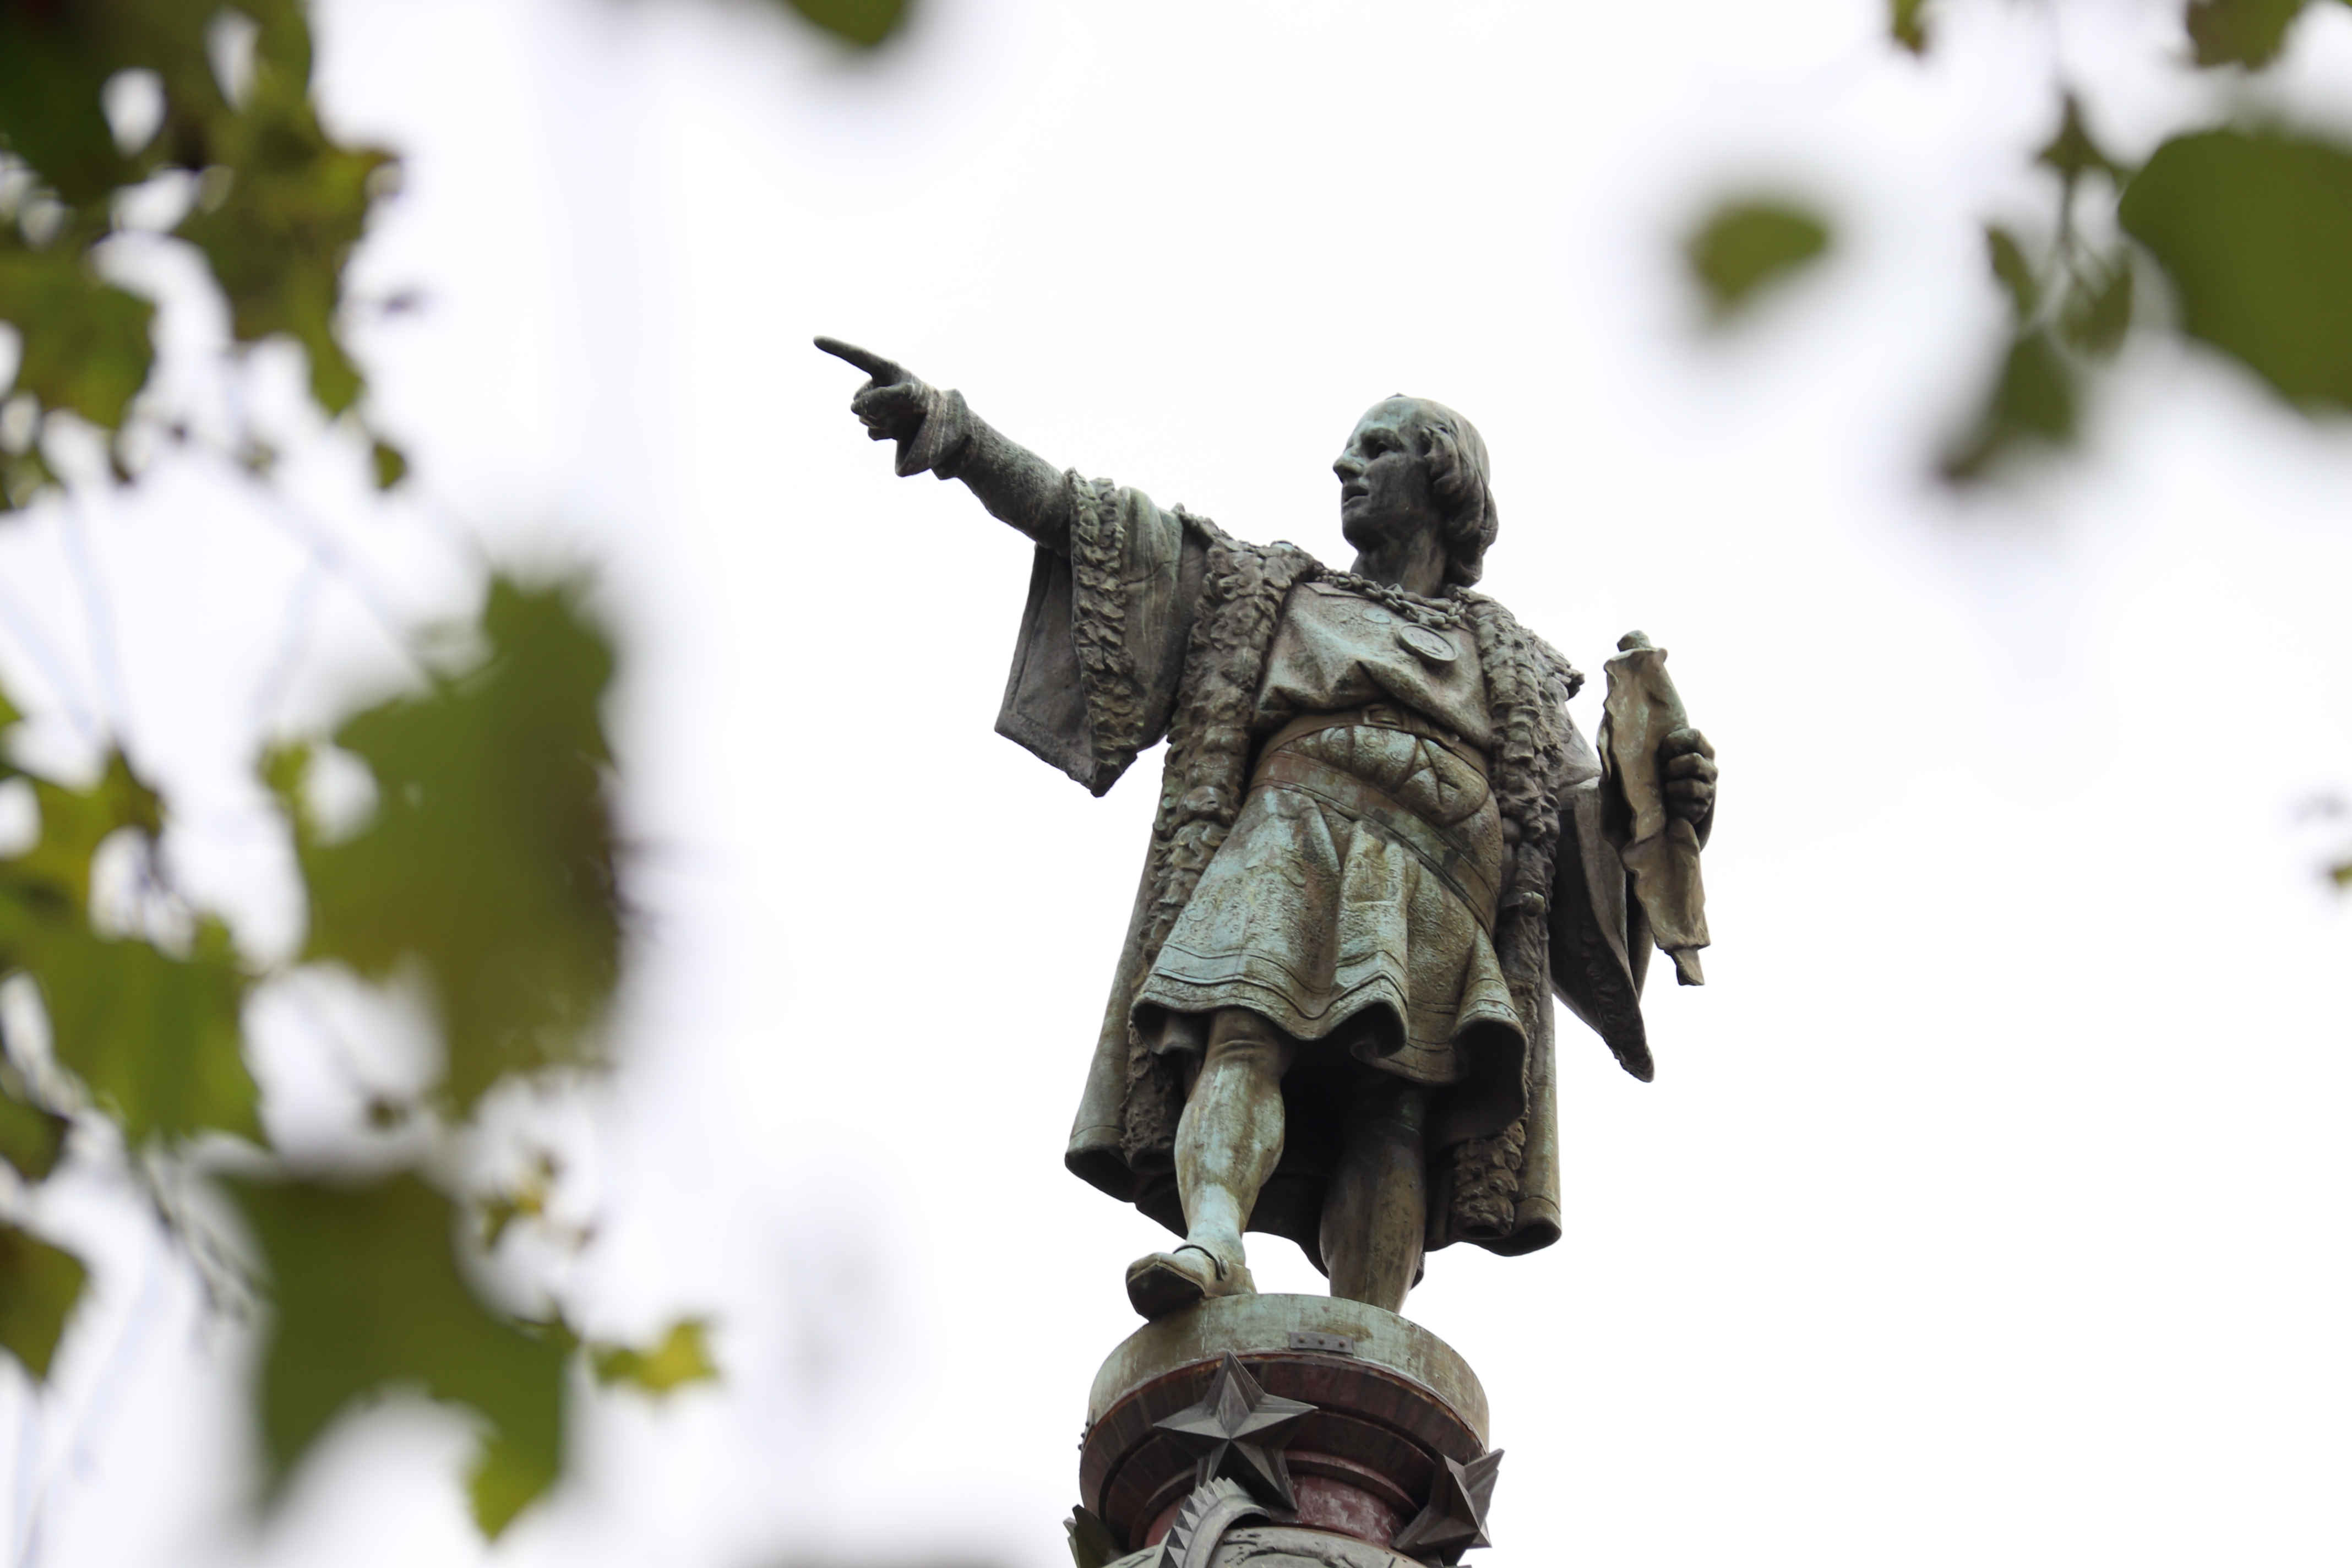 The monument to Cristopher Columbus in Barcelona (by Alan Ruiz Terol)